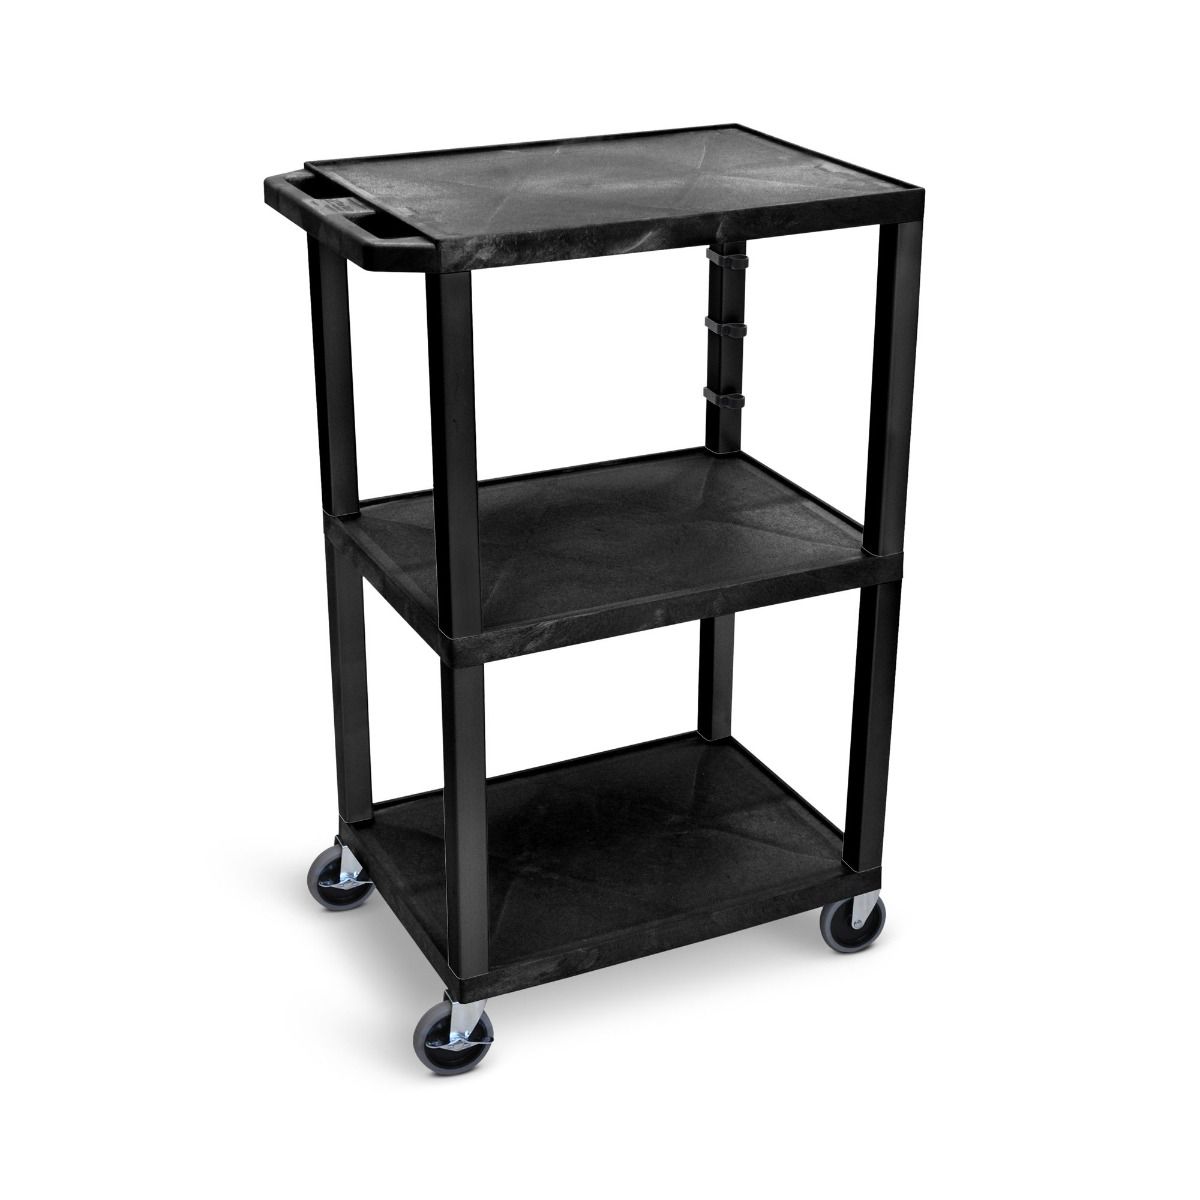 Luxor 42" High 3-Shelf Utility Cart [w/ 3-Outlet Electrical Assembly, Black Shelves and Legs]- UCPL1E Image 1